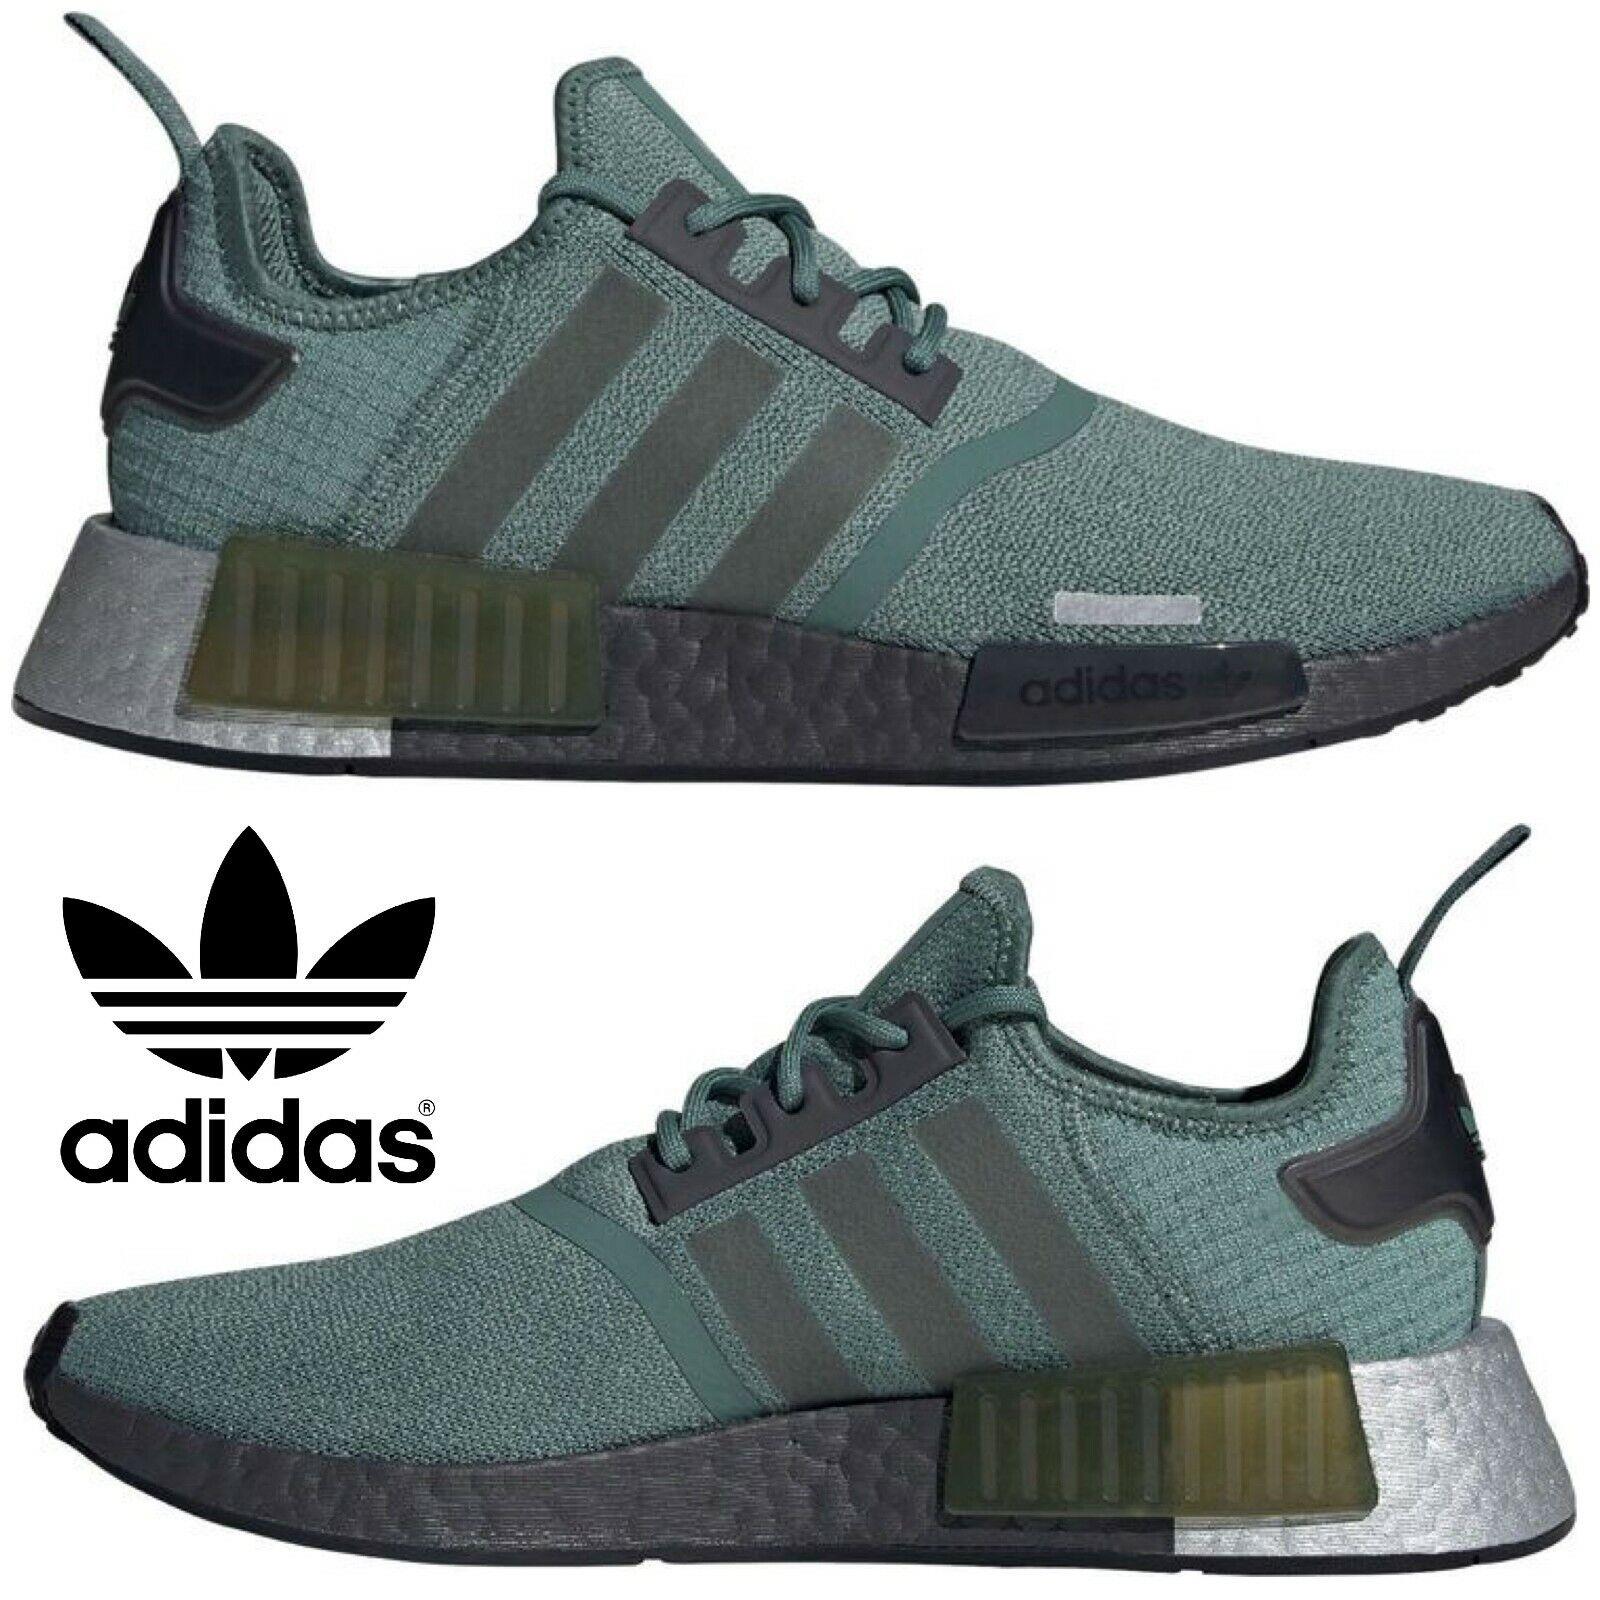 Adidas Originals Nmd R1 Men`s Sneakers Running Shoes Gym Casual Sport Green - Green , GREEN/SILVER Manufacturer